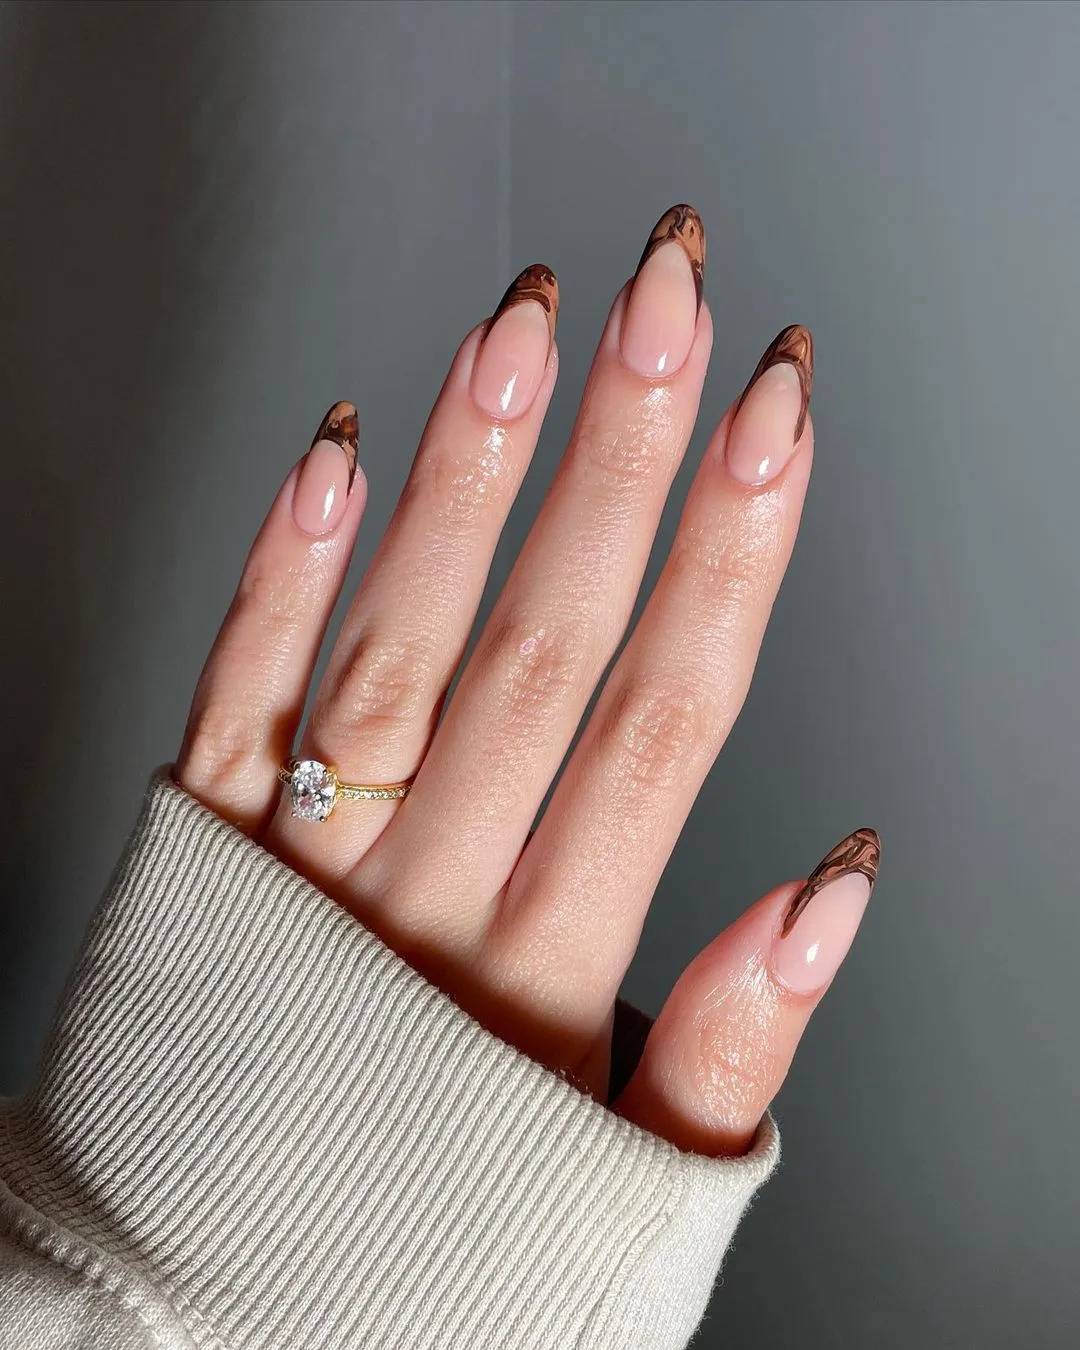 30 Autumn Nail Designs Too Chic To Resist - 209